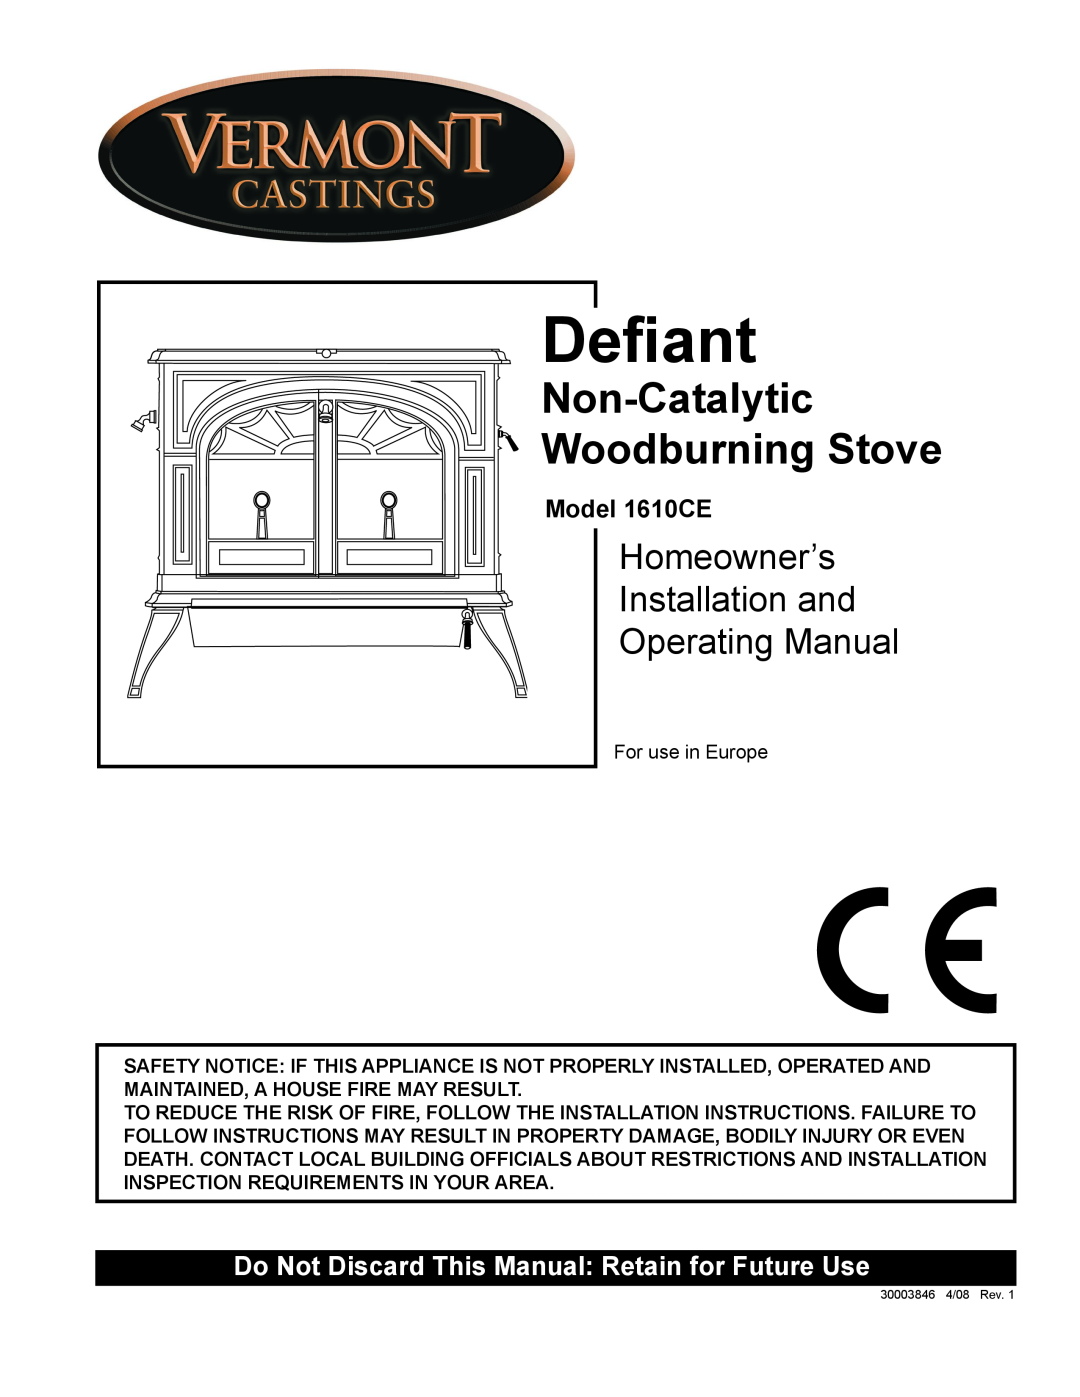 Vermont Casting installation instructions Deﬁant, Non-Catalytic Woodburning Stove, Model 1610CE 